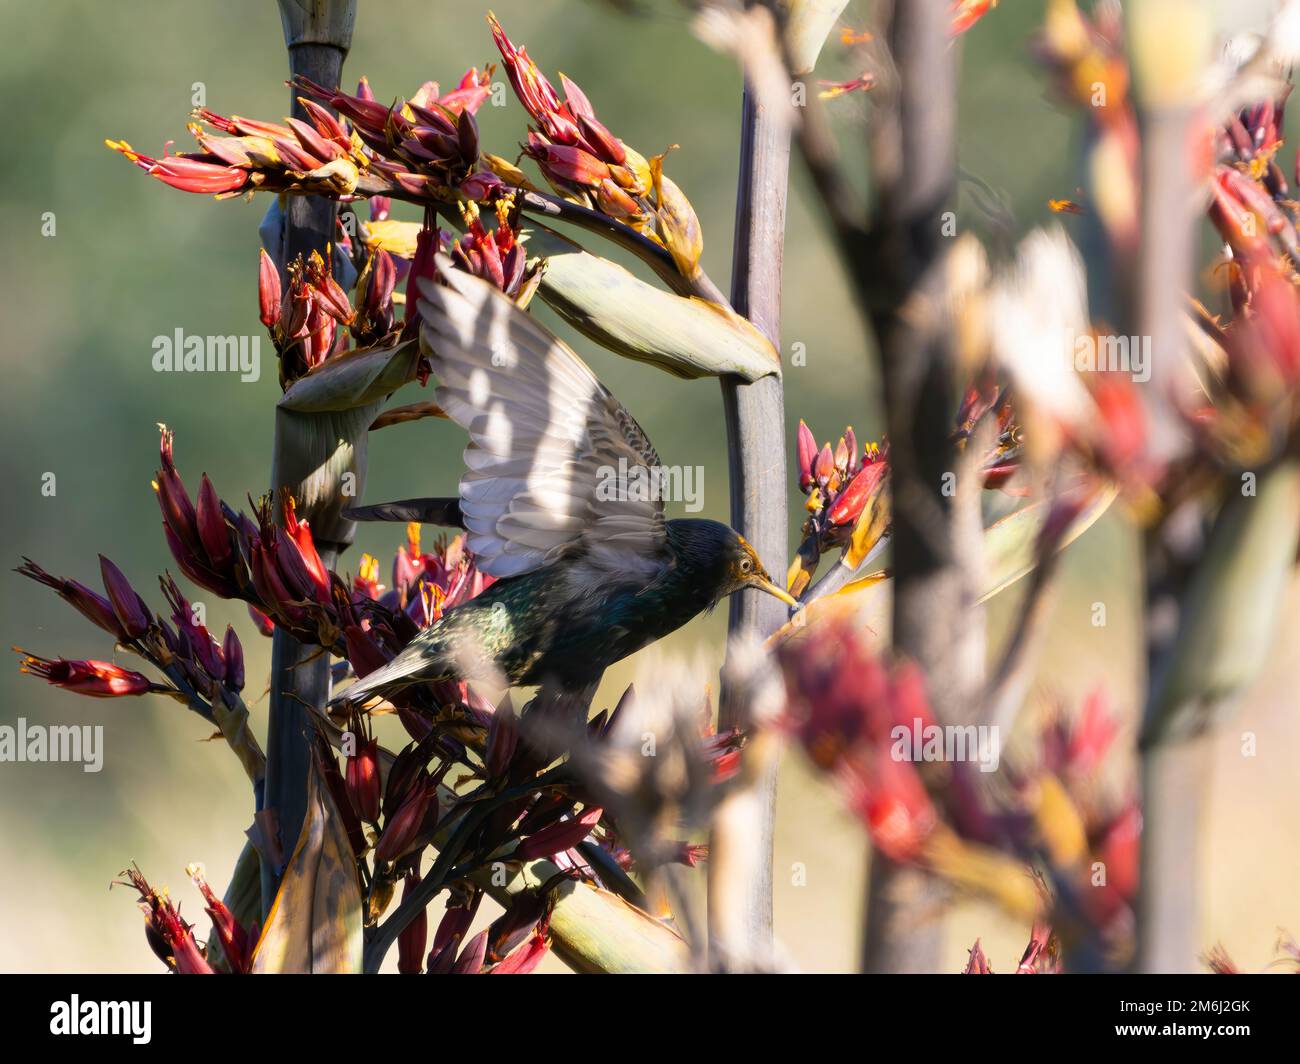 Birding and Birdwatching: European Starling feeding from the uniqe New Zealand's Flax flowers in summer. Stock Photo